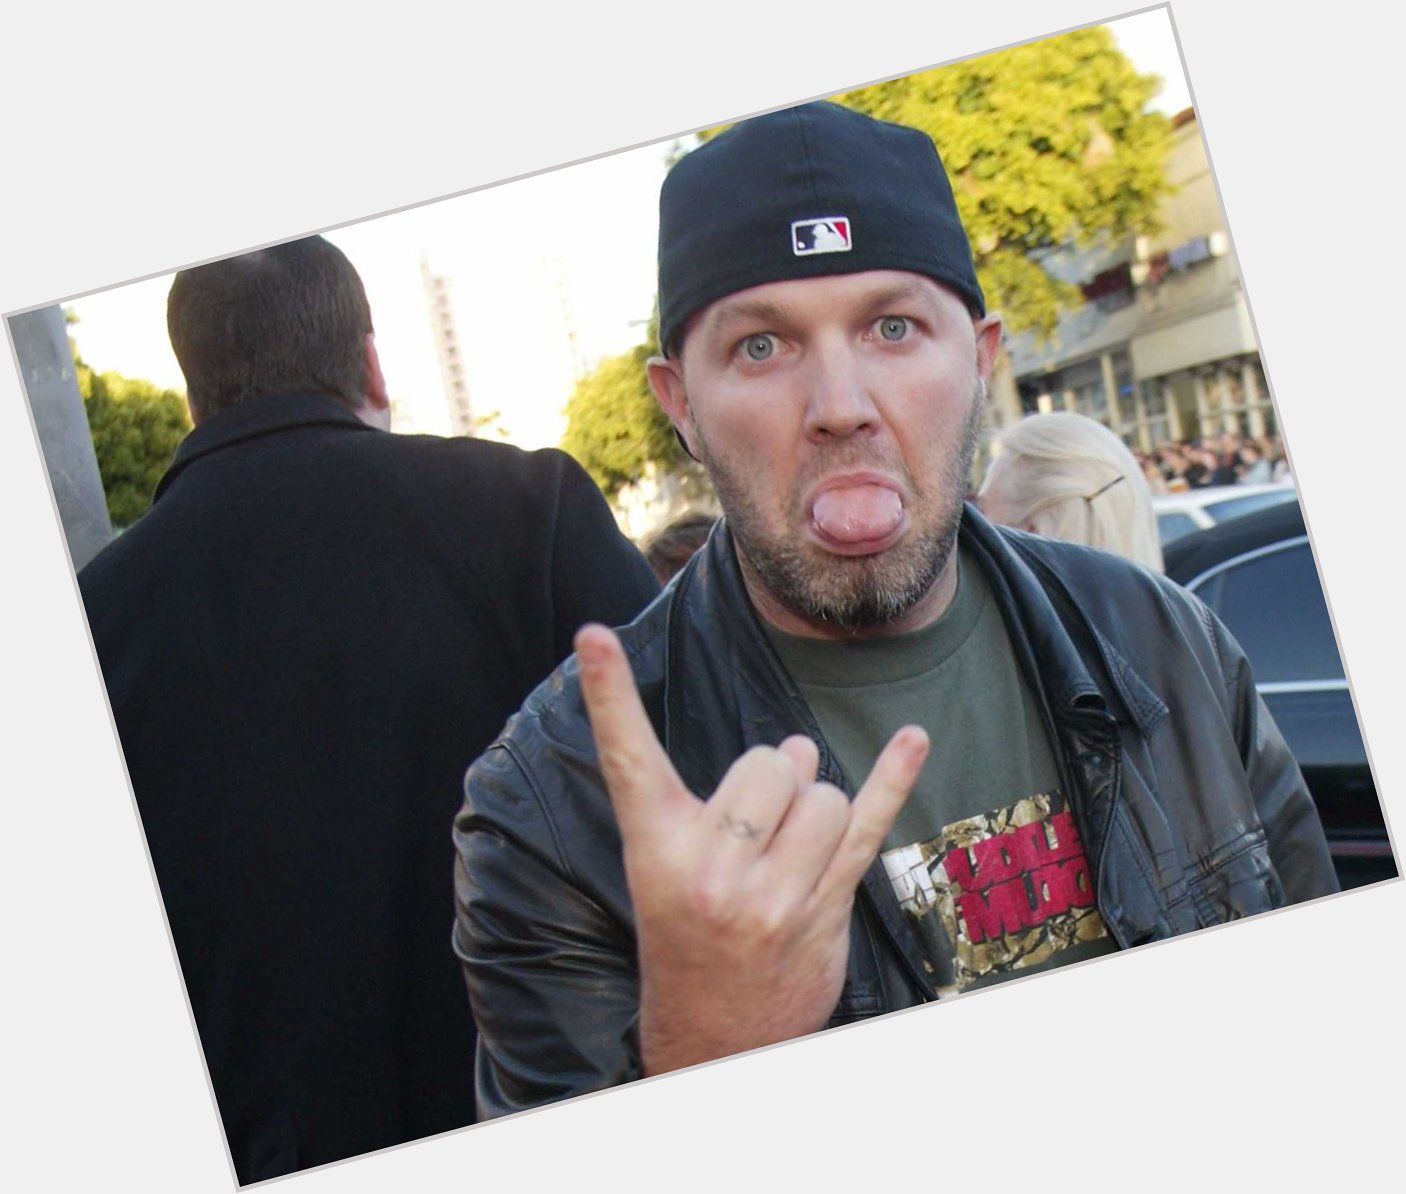 HE DID IT ALL FOR THE NOOKIE HAPPY BIRTHDAY FRED DURST HE DRINKS WEIRD BRAND OF ENERGY DRINKS 